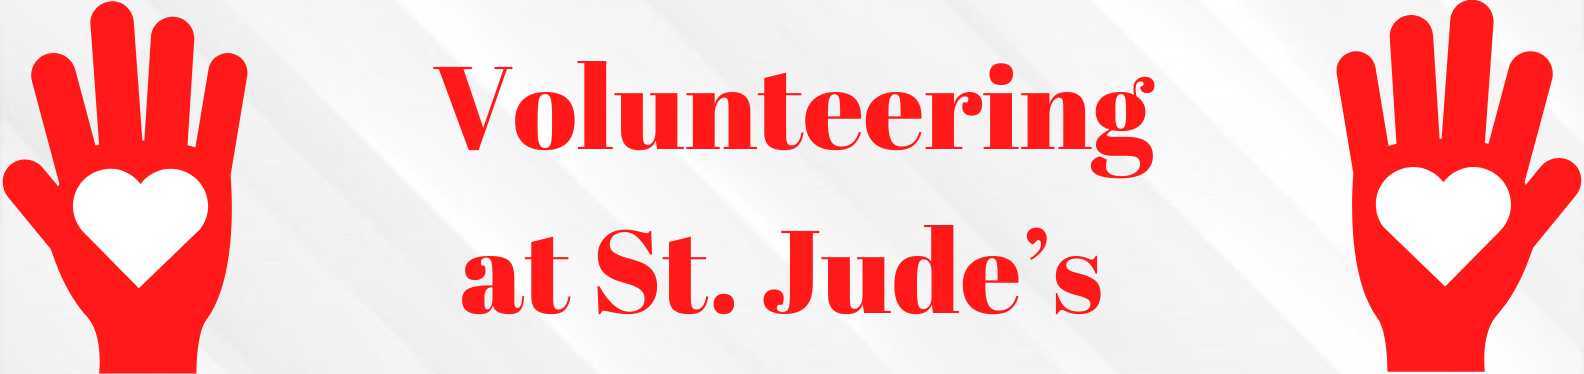 The words Volunteering at St. Jude's written in red, with a clipart image of a red hand with white heart in the centre of the palm on each side of the word.